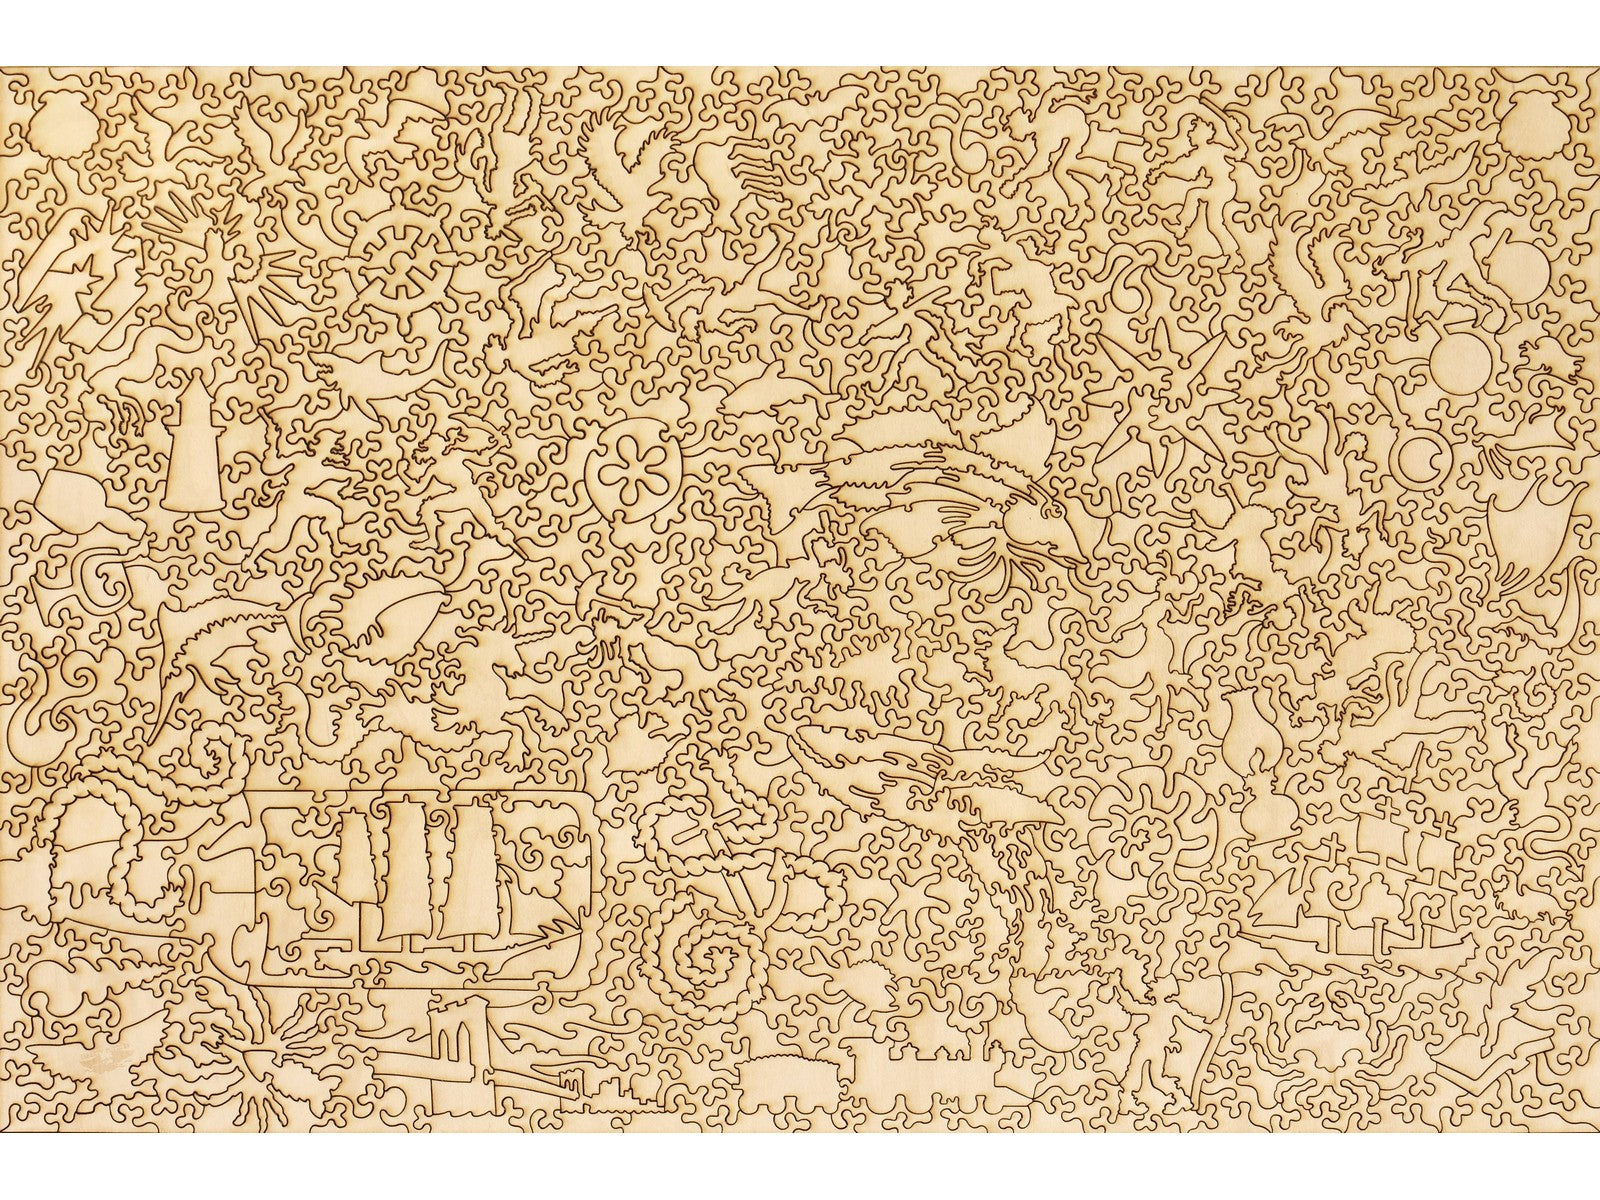 The back of the puzzle, Map of Long Island.